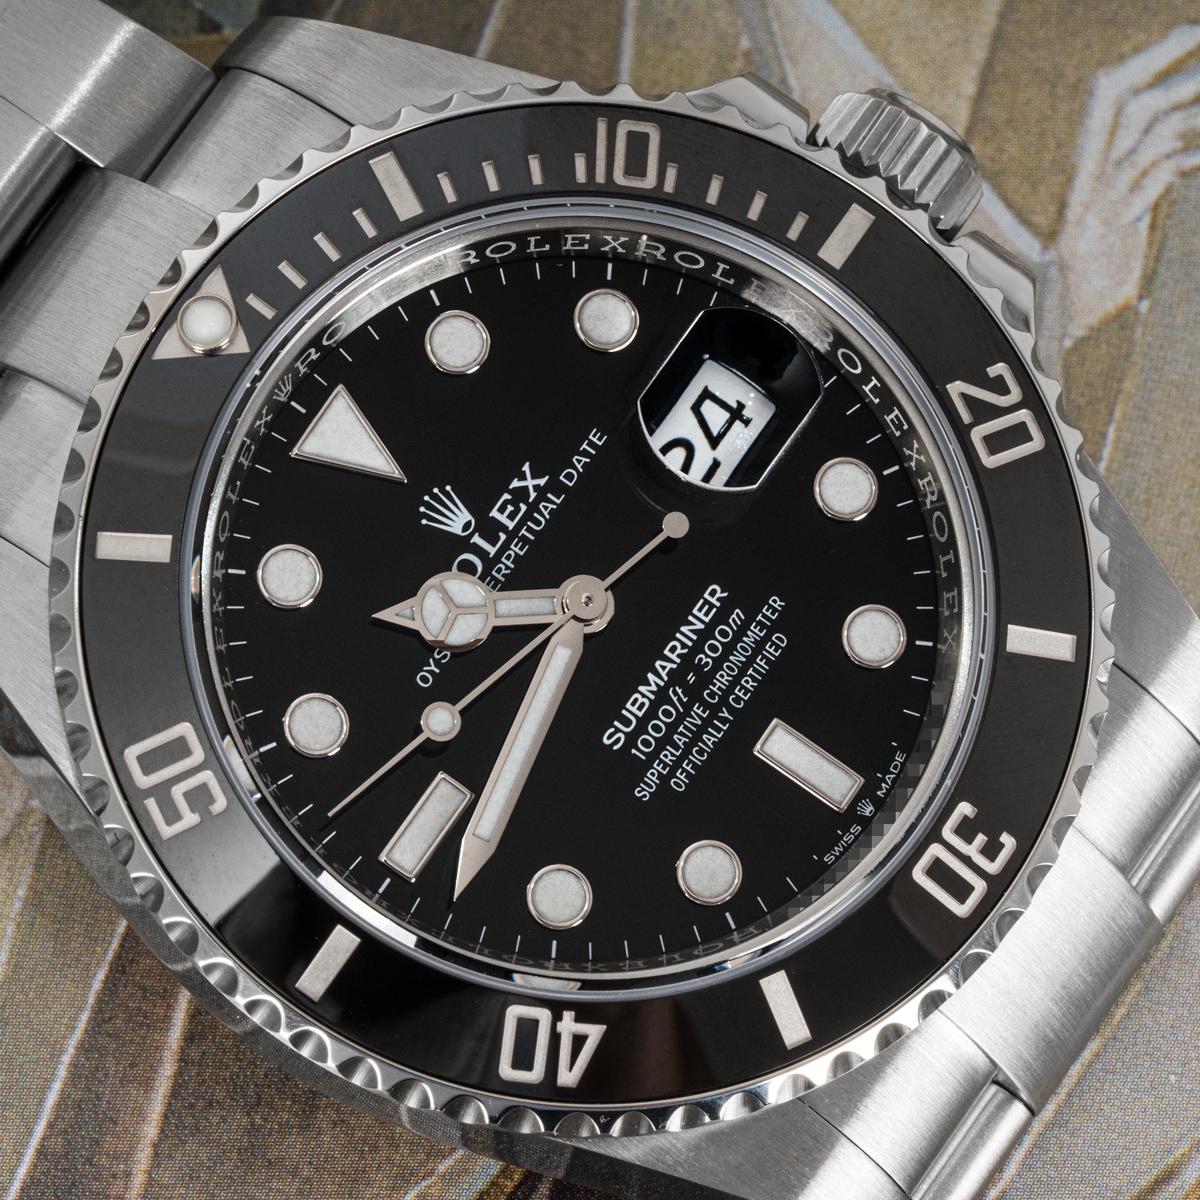 An unworn 41mm Submariner Date in Oystersteel by Rolex. Features a black dial and a black ceramic unidirectional rotatable bezel with 60-minute graduations coated in platinum.

Fitted with a scratch-resistant sapphire crystal and a self-winding